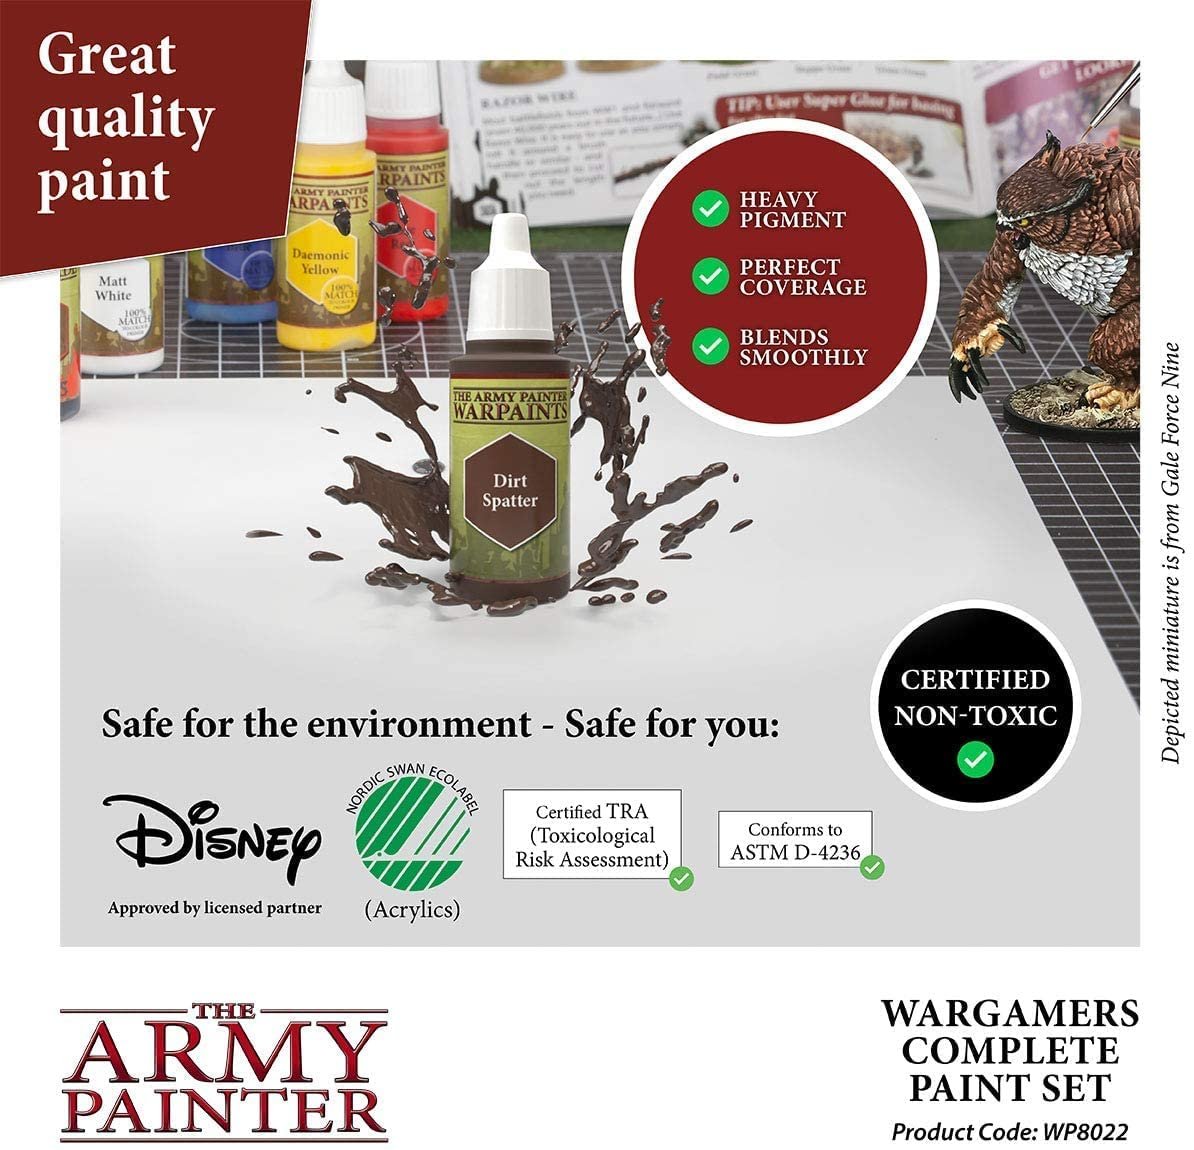 Army Painter Airbrush Medium On Pre-Order Now